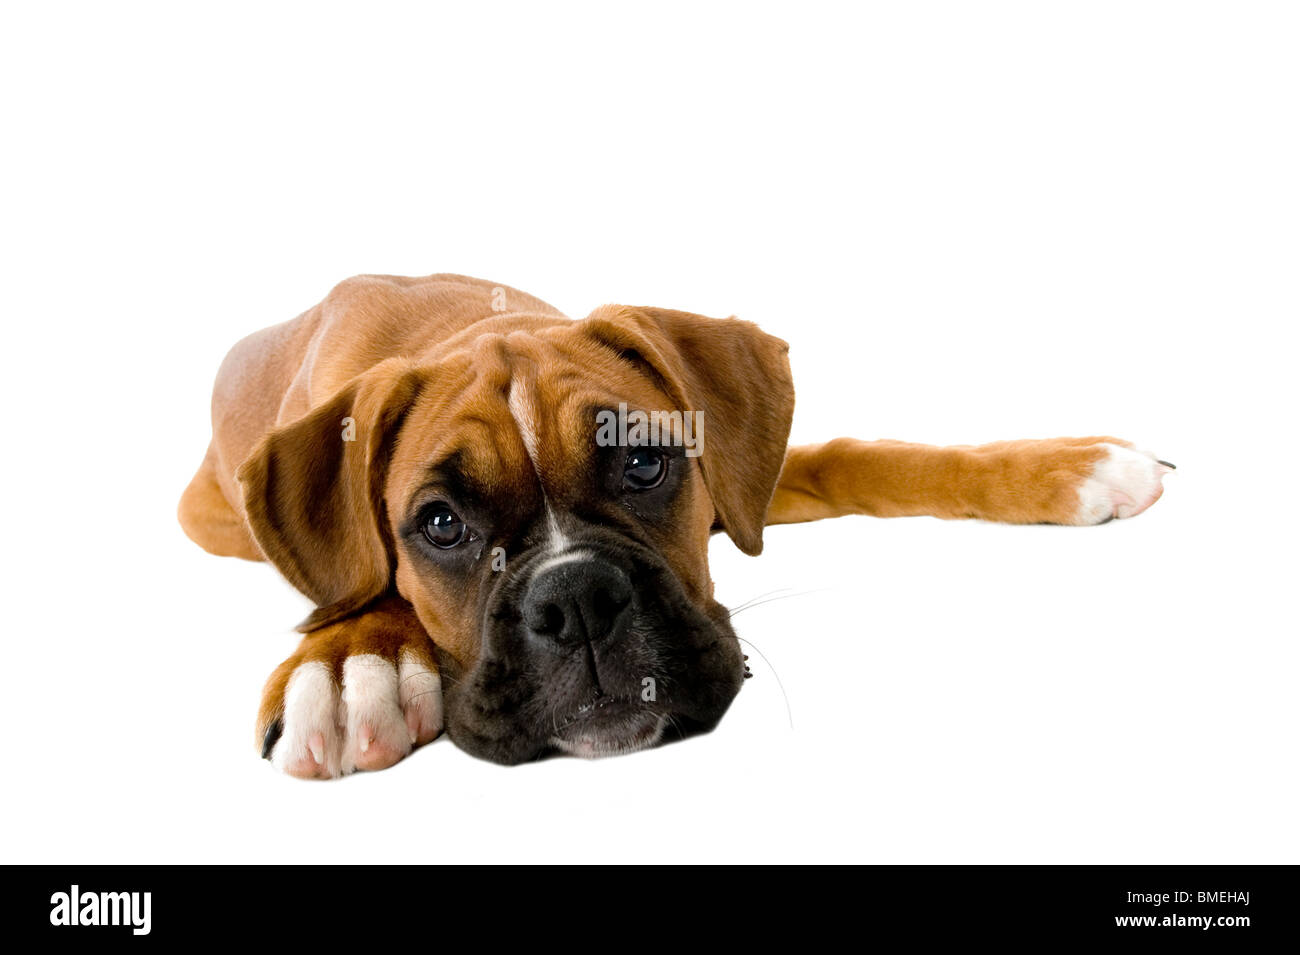 Boxer Dog Funny High Resolution Stock Photography and Images - Alamy